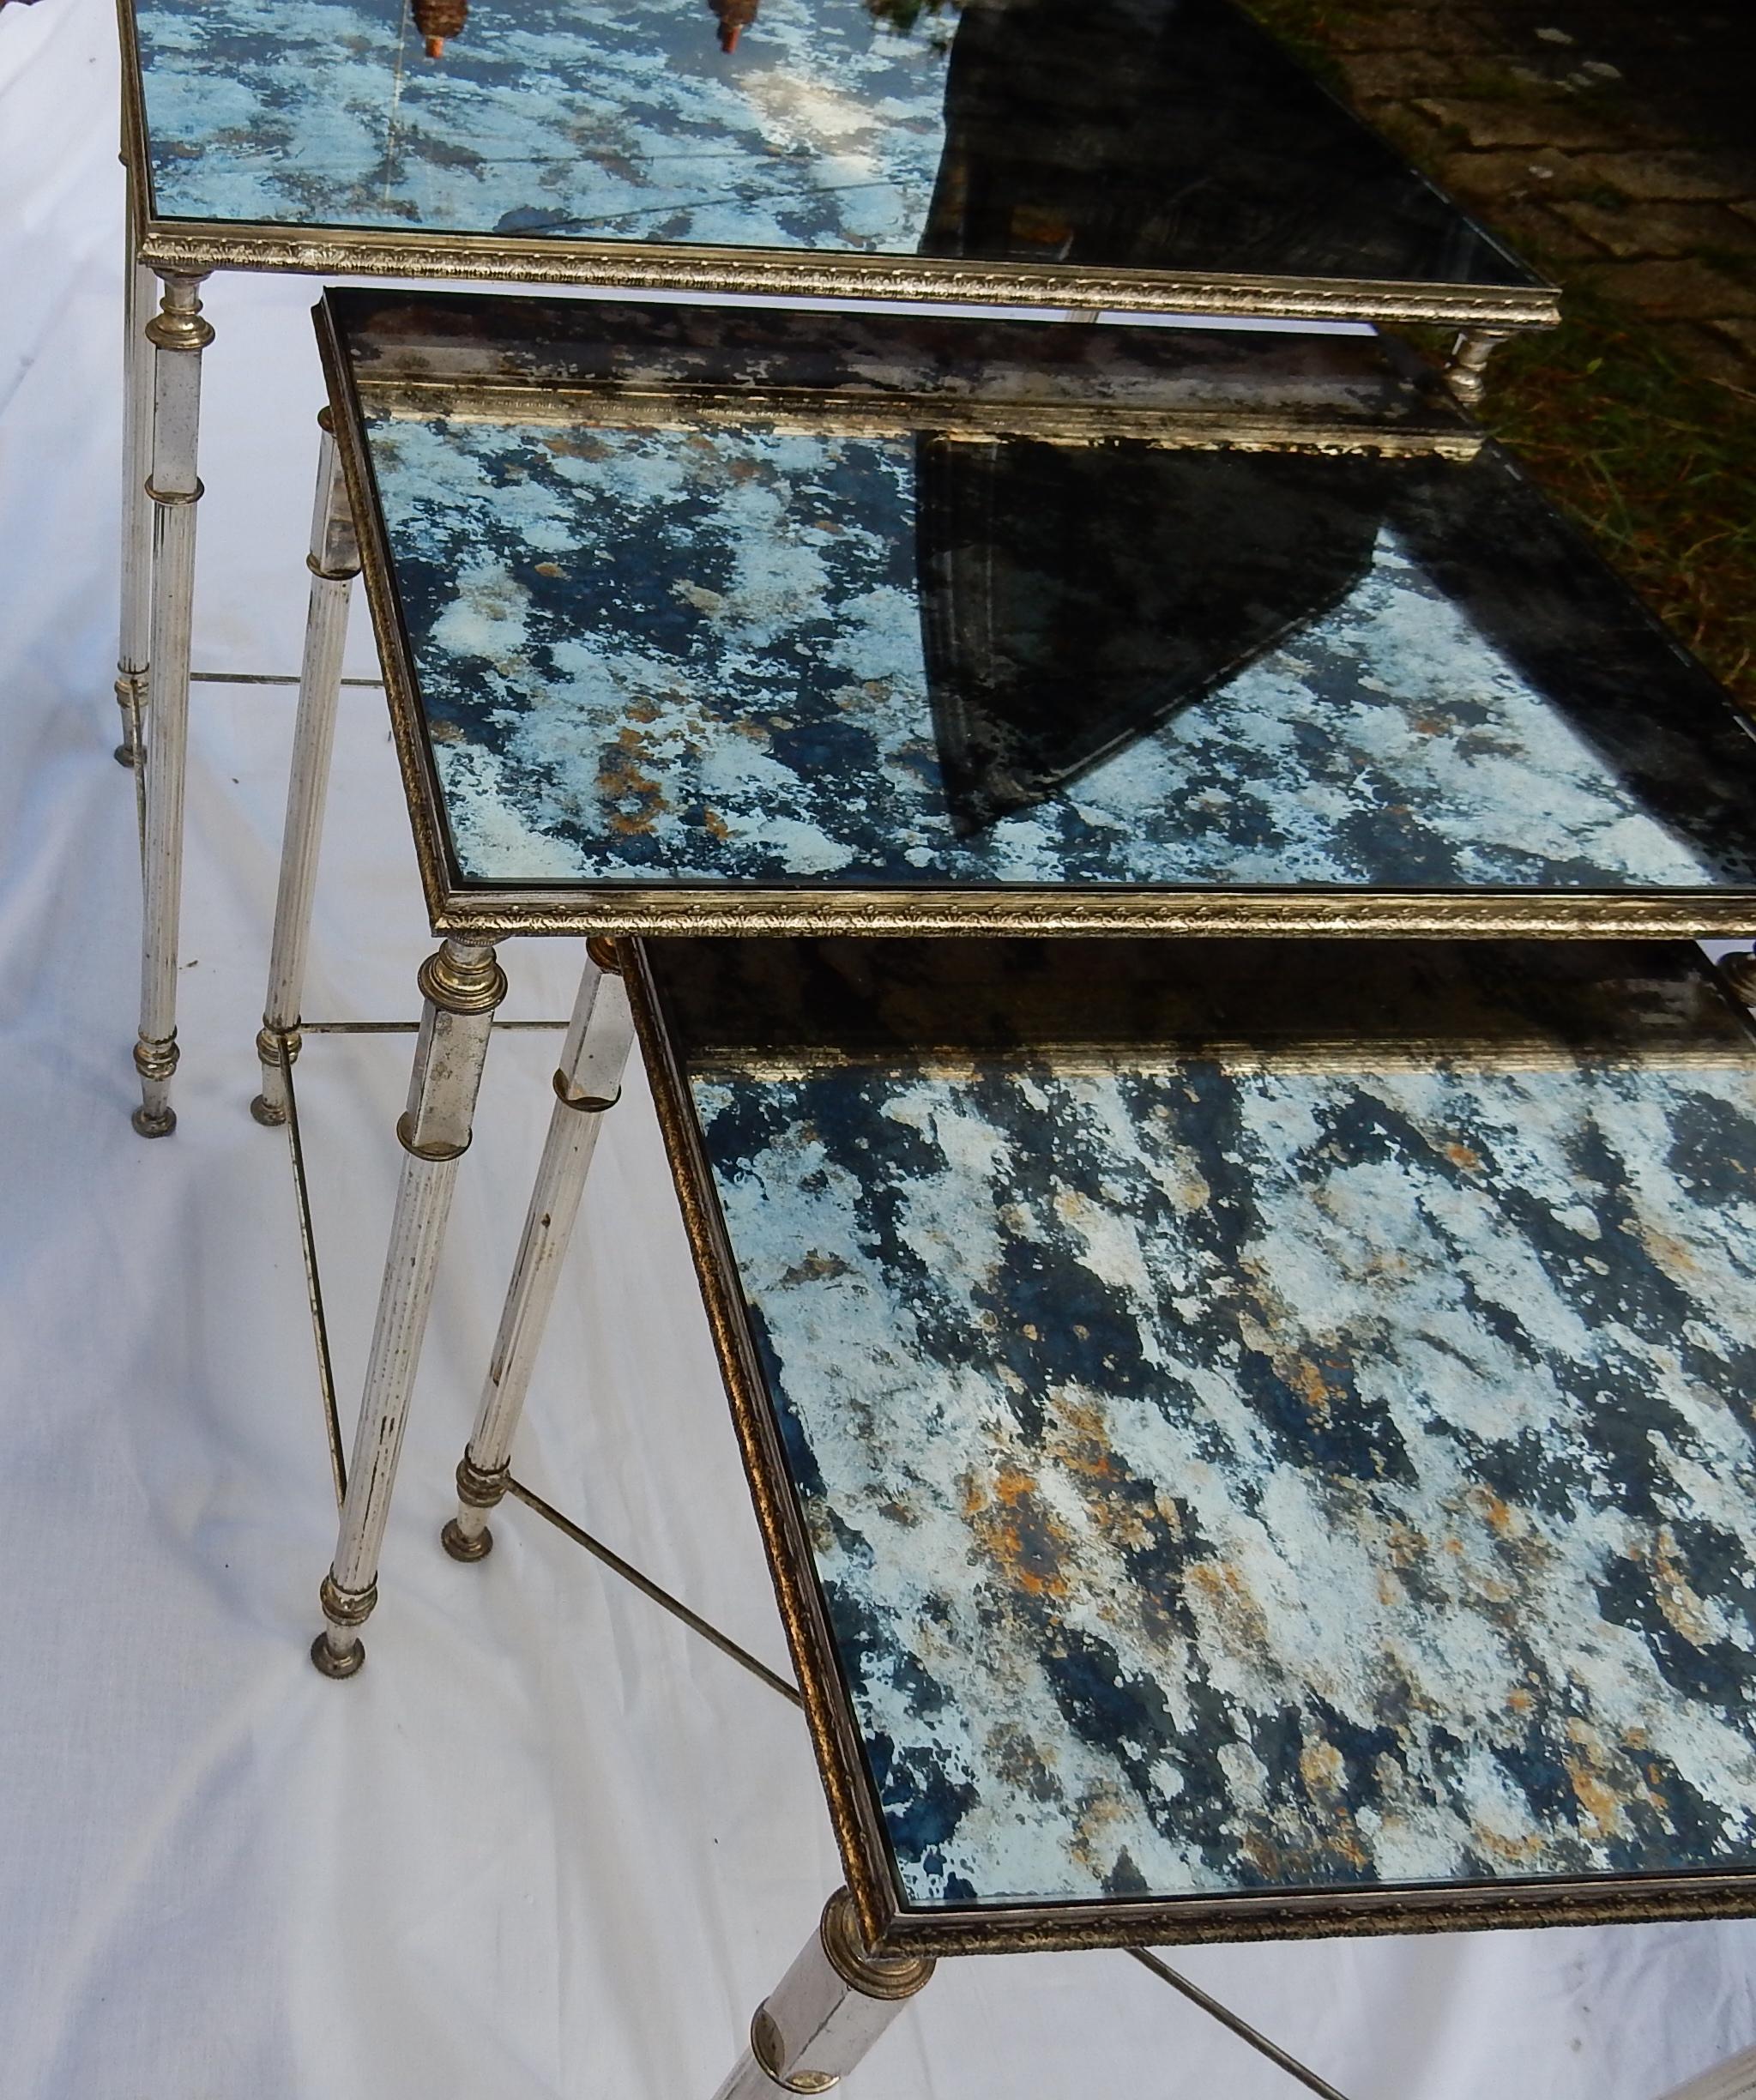 3 brass nested side tables, with oxyded olded mirror trays, Amounts in silver plated, in the style of Maison Baguès, circa 1970. Good condition.
Measures: 51 x 32 x 44 cm
42 x 32 x 42 cm
32 x 32 x 38 cm.